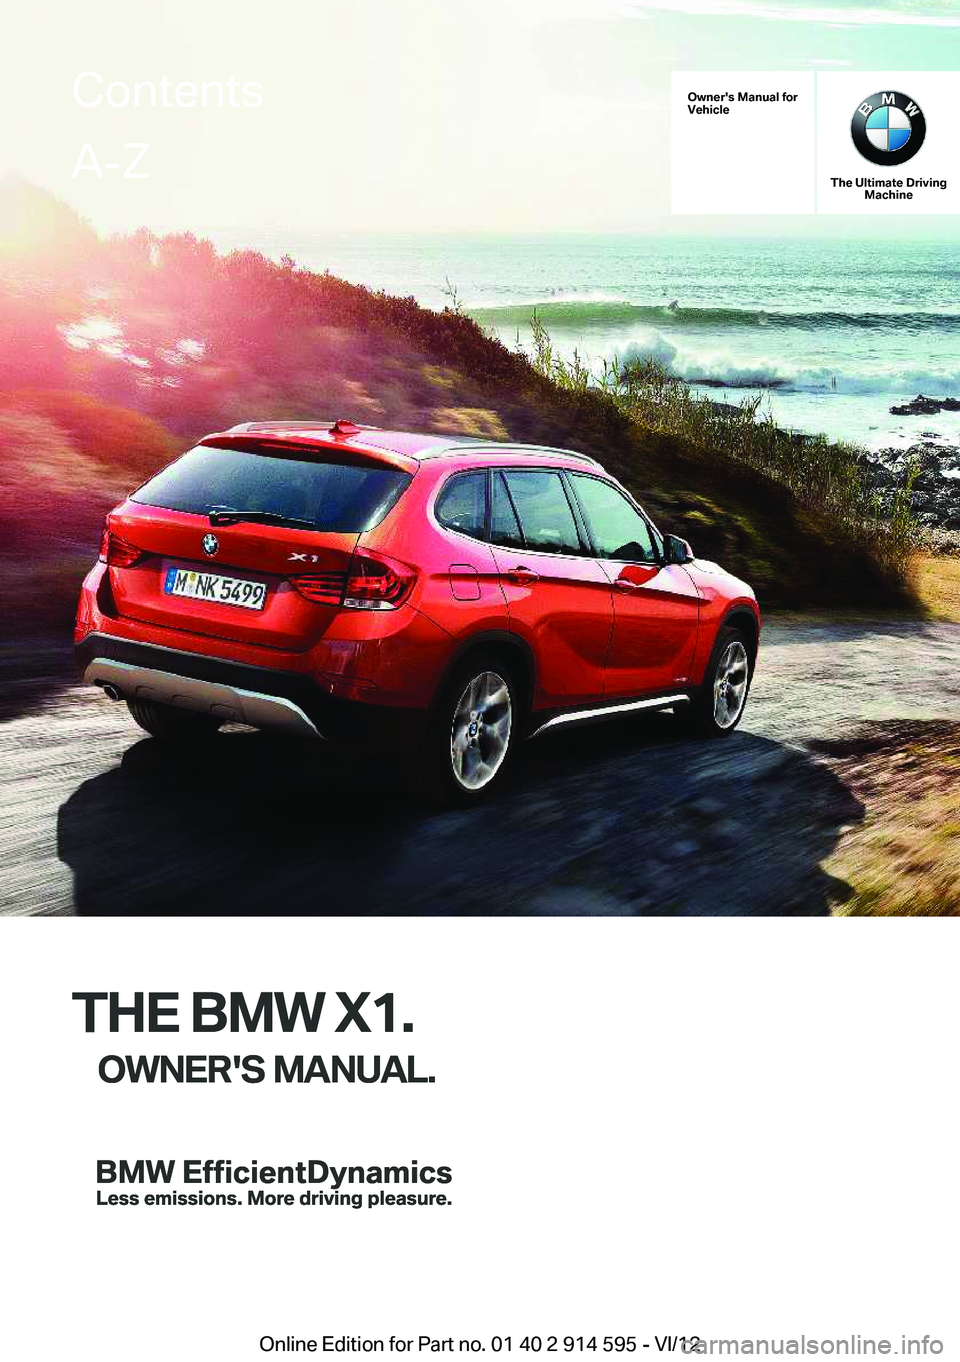 BMW X1 SDRIVE28I 2013  Owners Manual Owner's Manual for
Vehicle
THE BMW X1.
OWNER'S MANUAL.
The Ultimate Driving Machine
THE BMW X1.
OWNER'S MANUAL.
ContentsA-Z
Online Edition for Part no. 01 40 2 914 595 - VI/12    